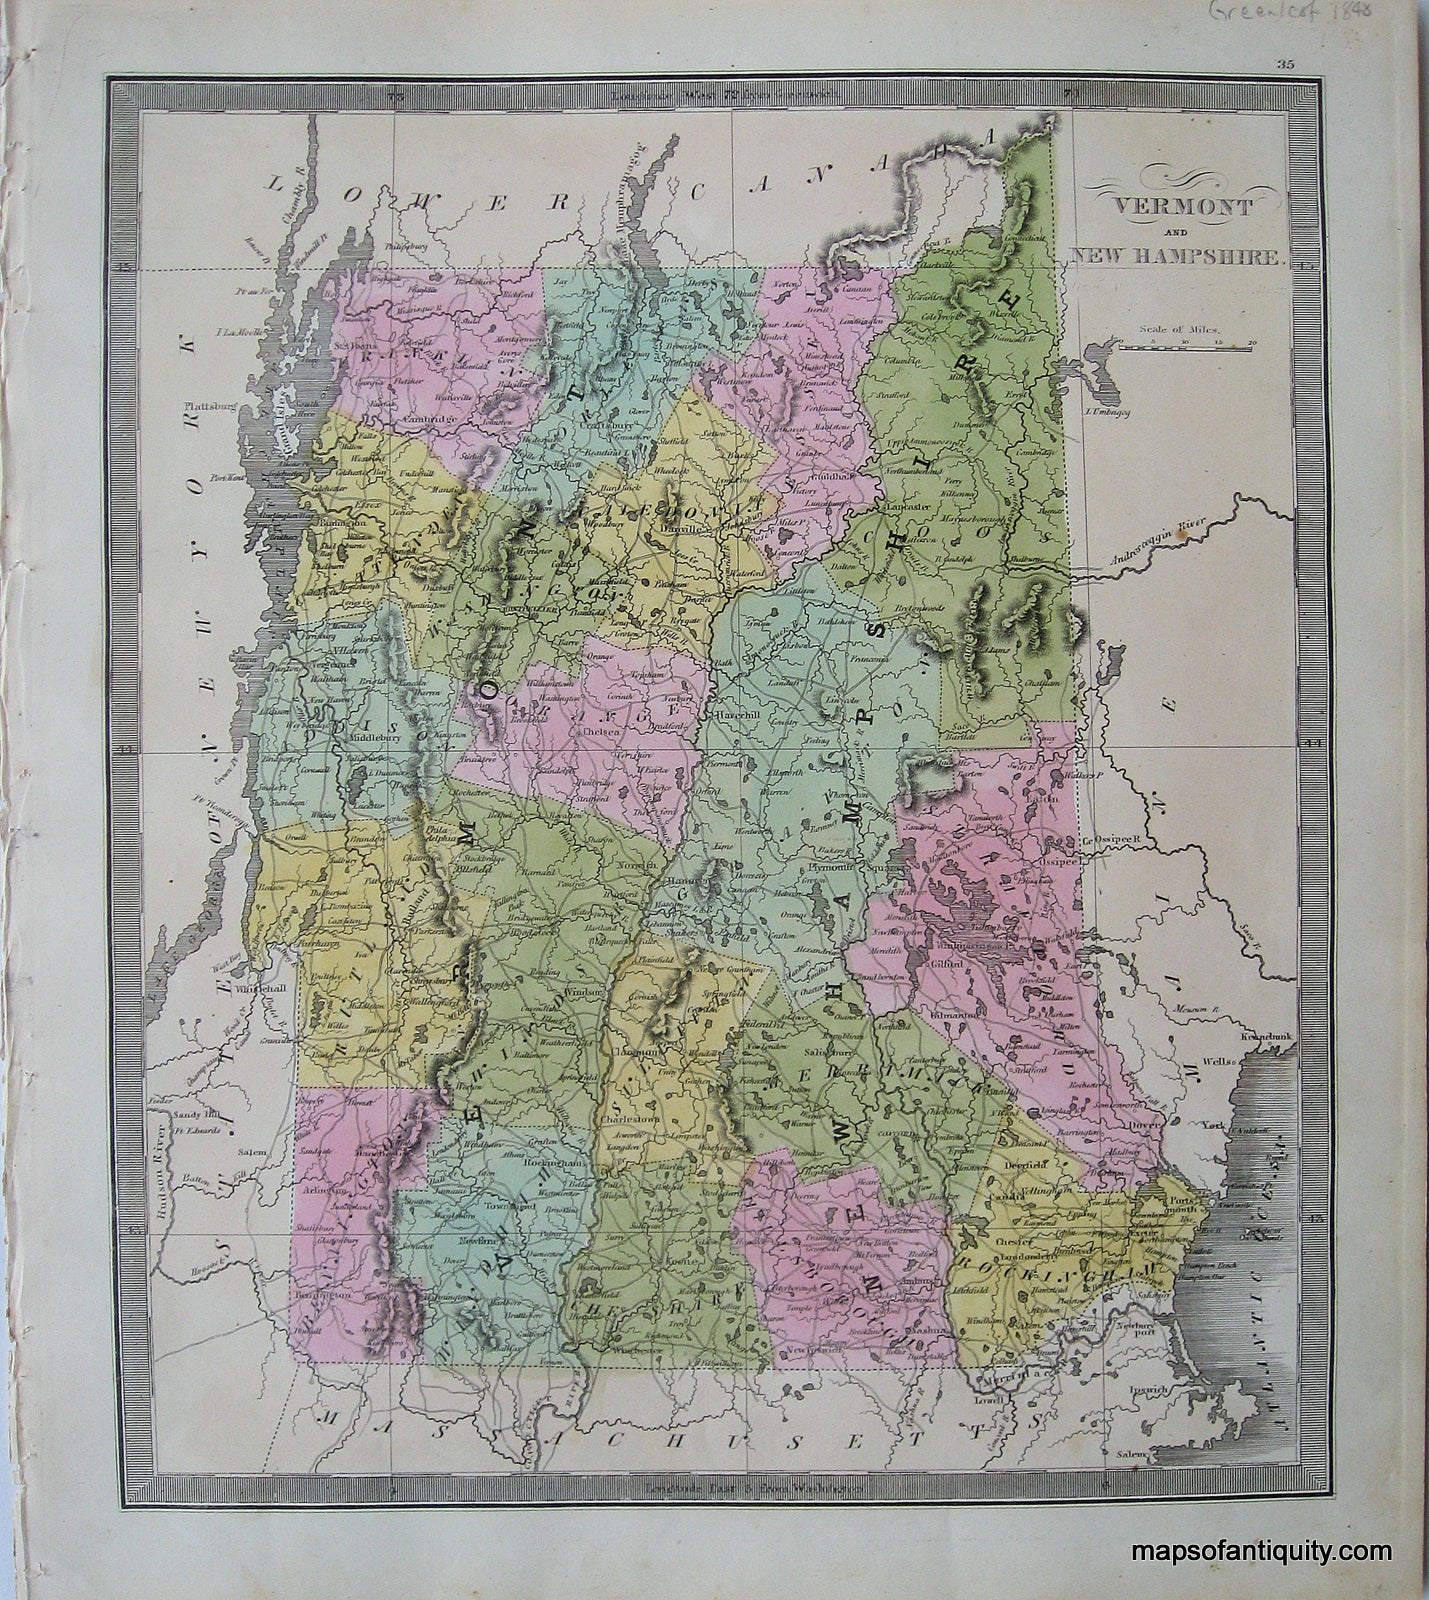 Antique-Hand-Colored-Map-Vermont-and-New-Hampshire.-United-States-New-England-1848-Jeremiah-Greenleaf-Maps-Of-Antiquity